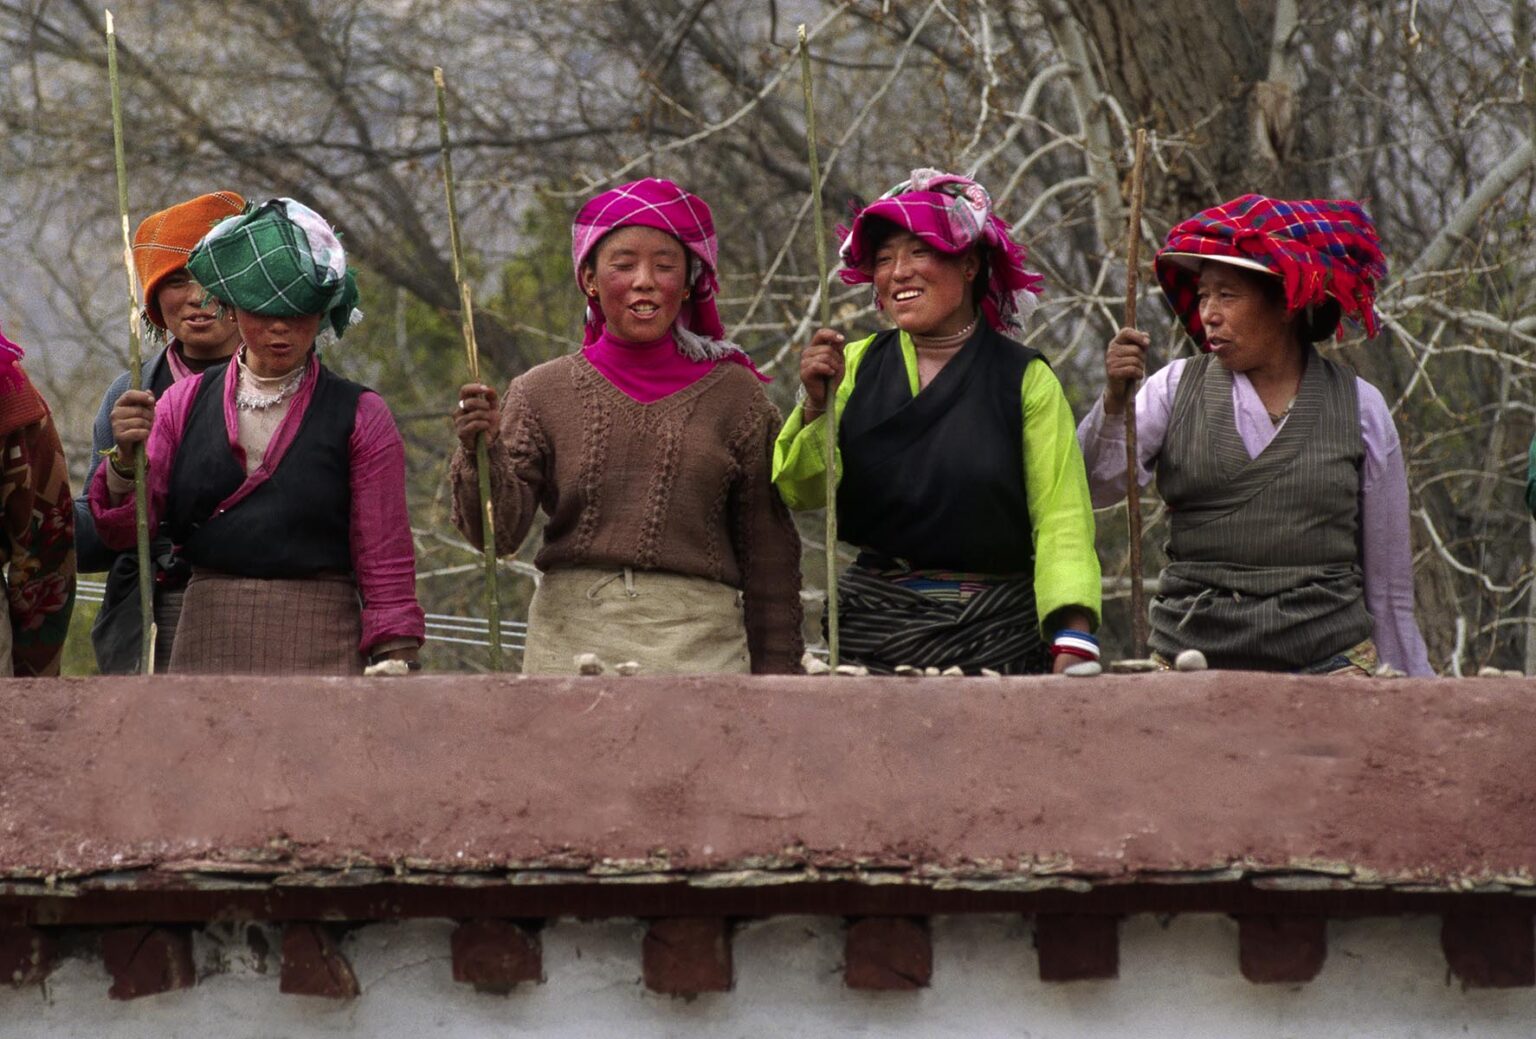 TIBETAN WOMEN dance & sing while packing a roof at the NORBULINGKA which was the Dalai Lama's Summer Palace - LHASA, TIBET